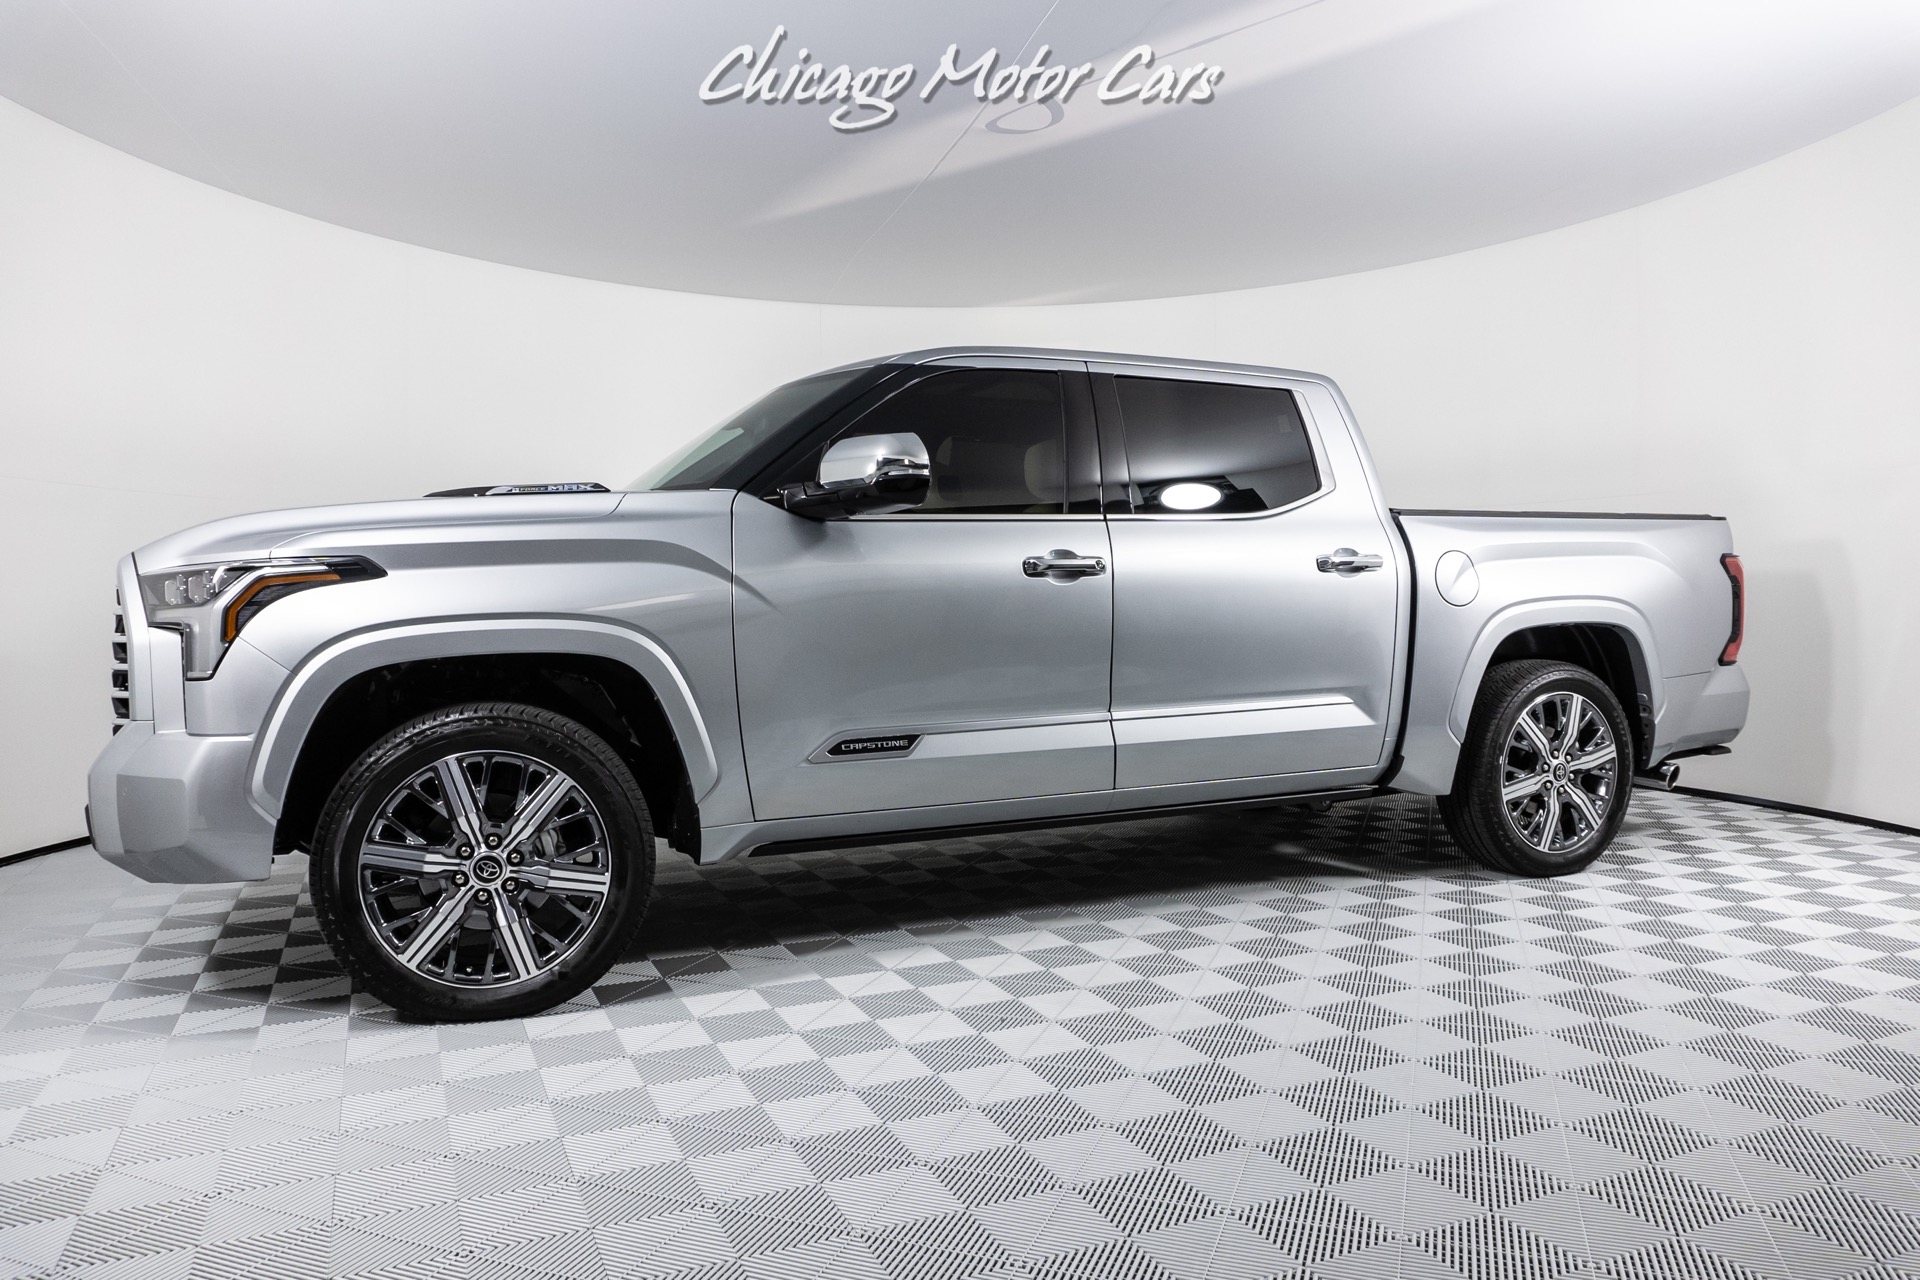 Used-2022-Toyota-Tundra-Capstone-HV-CREWMAX-4x4-only-700-miles-New-Hybrid-Technology-Bed-Extender